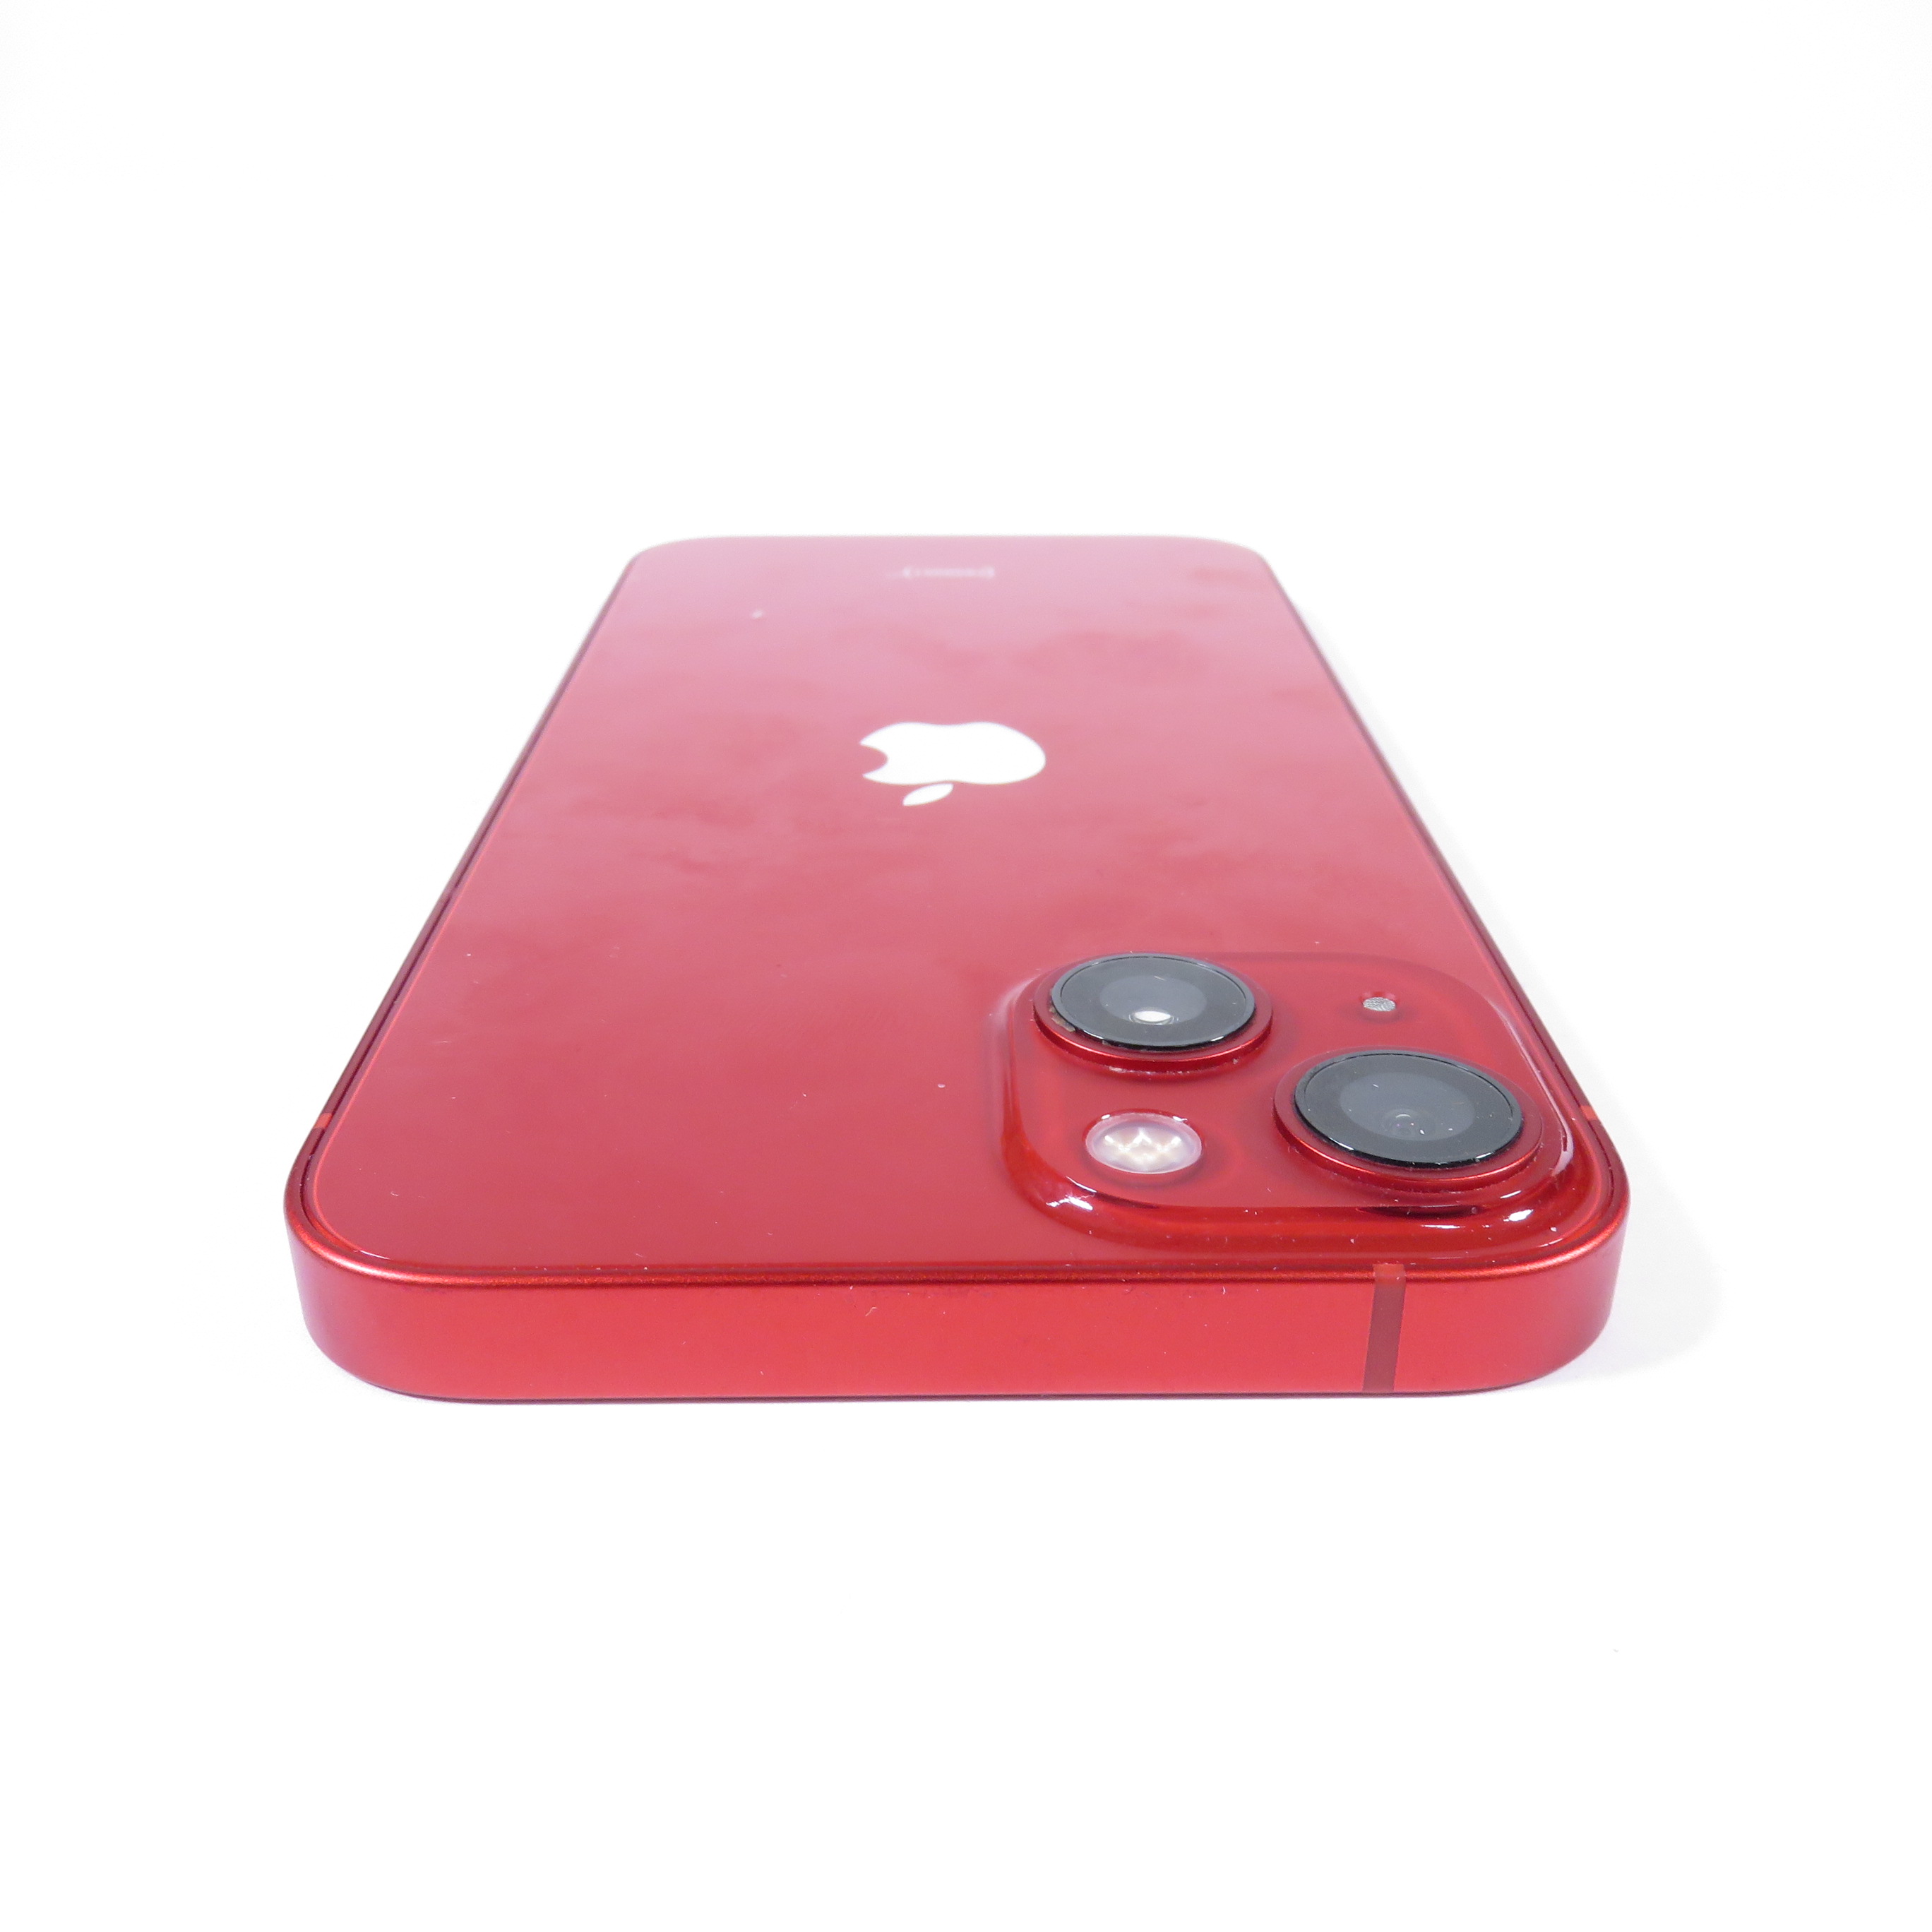 Apple iPhone 13 (PRODUCT)RED - 128GB - (Unlocked) for sale online